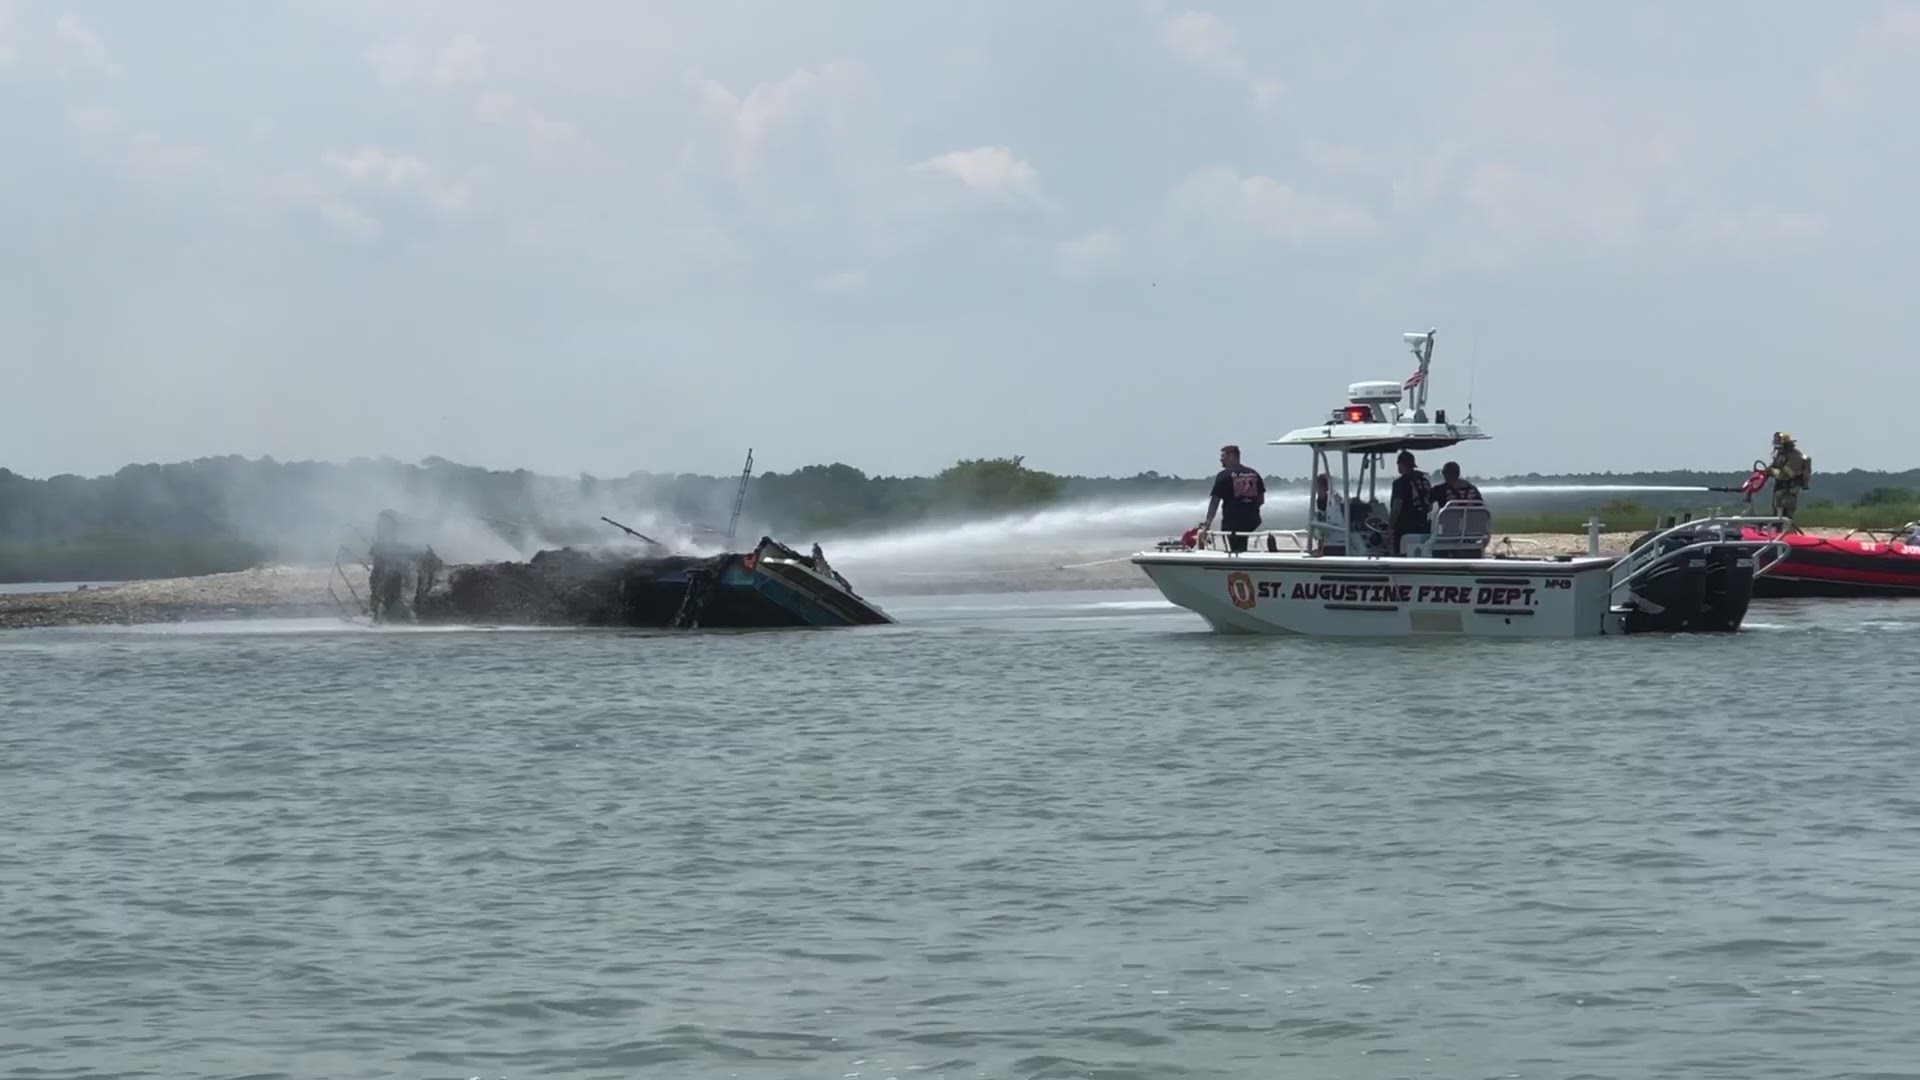 Fire rescue hosed down a boat Wednesday after it was engulfed in flames in the Intracoastal Waterway and Matanzas Inlet.